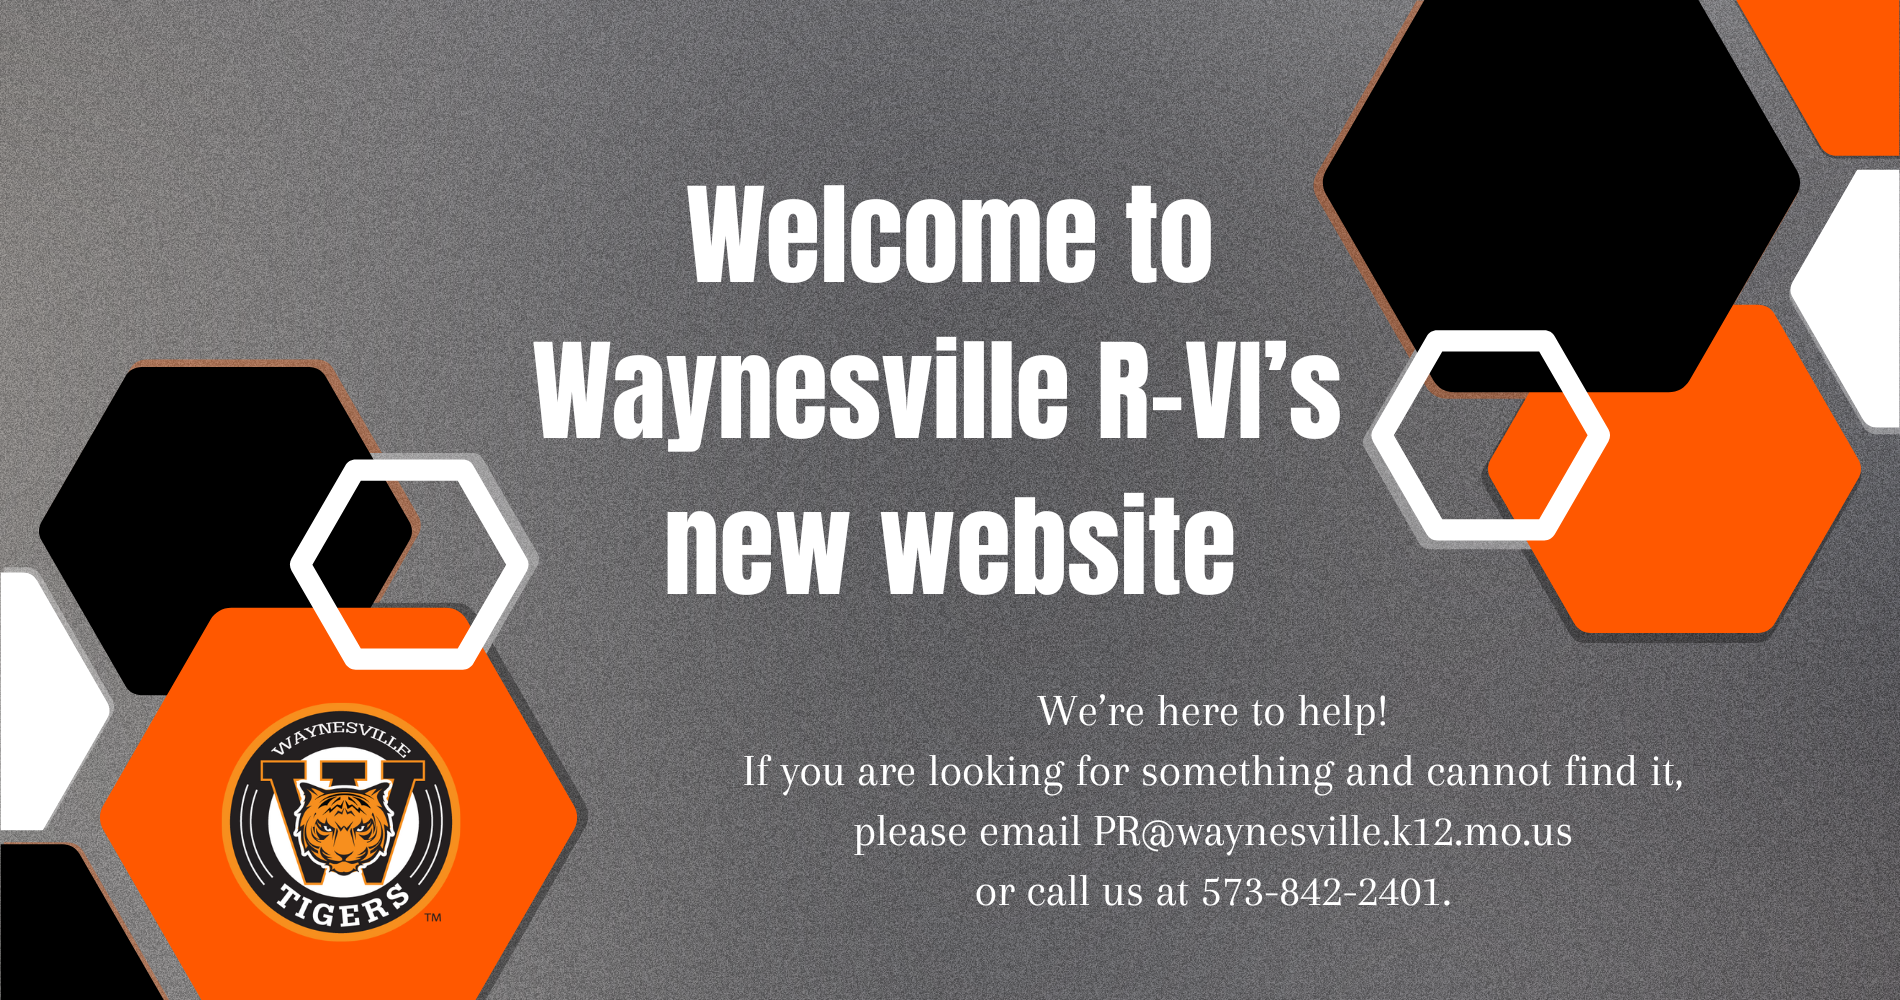 Welcome to the new website. If you need assistance finding something, please call 573-842-2041